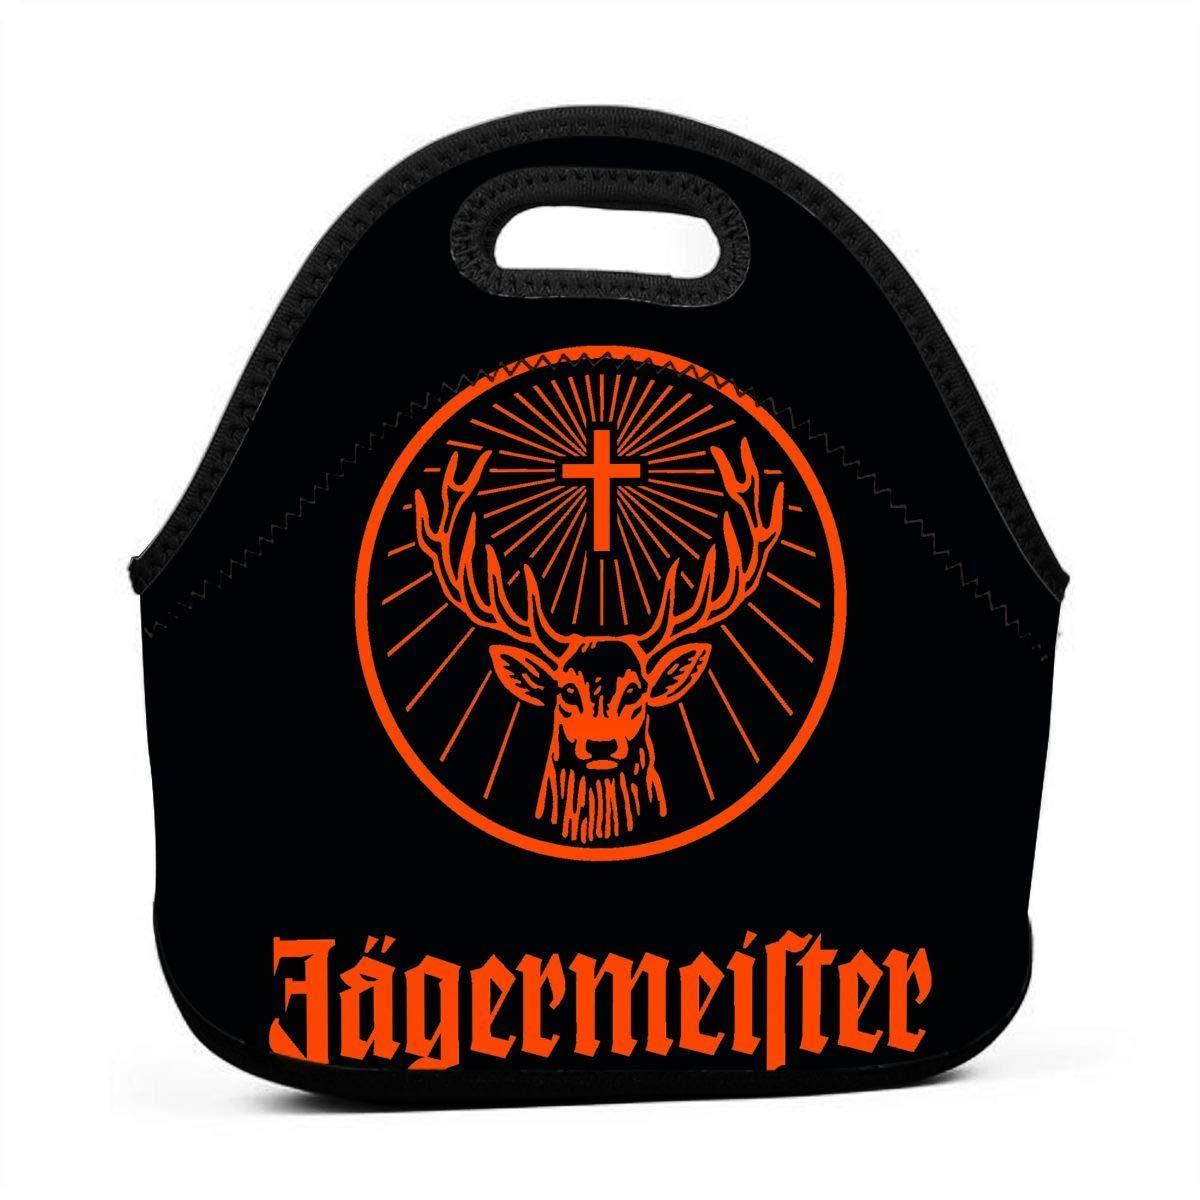 Jaegermeister Logo - Amazon.com: Deluxe Neoprene Insulated Lunch Bag Extra Thick ...